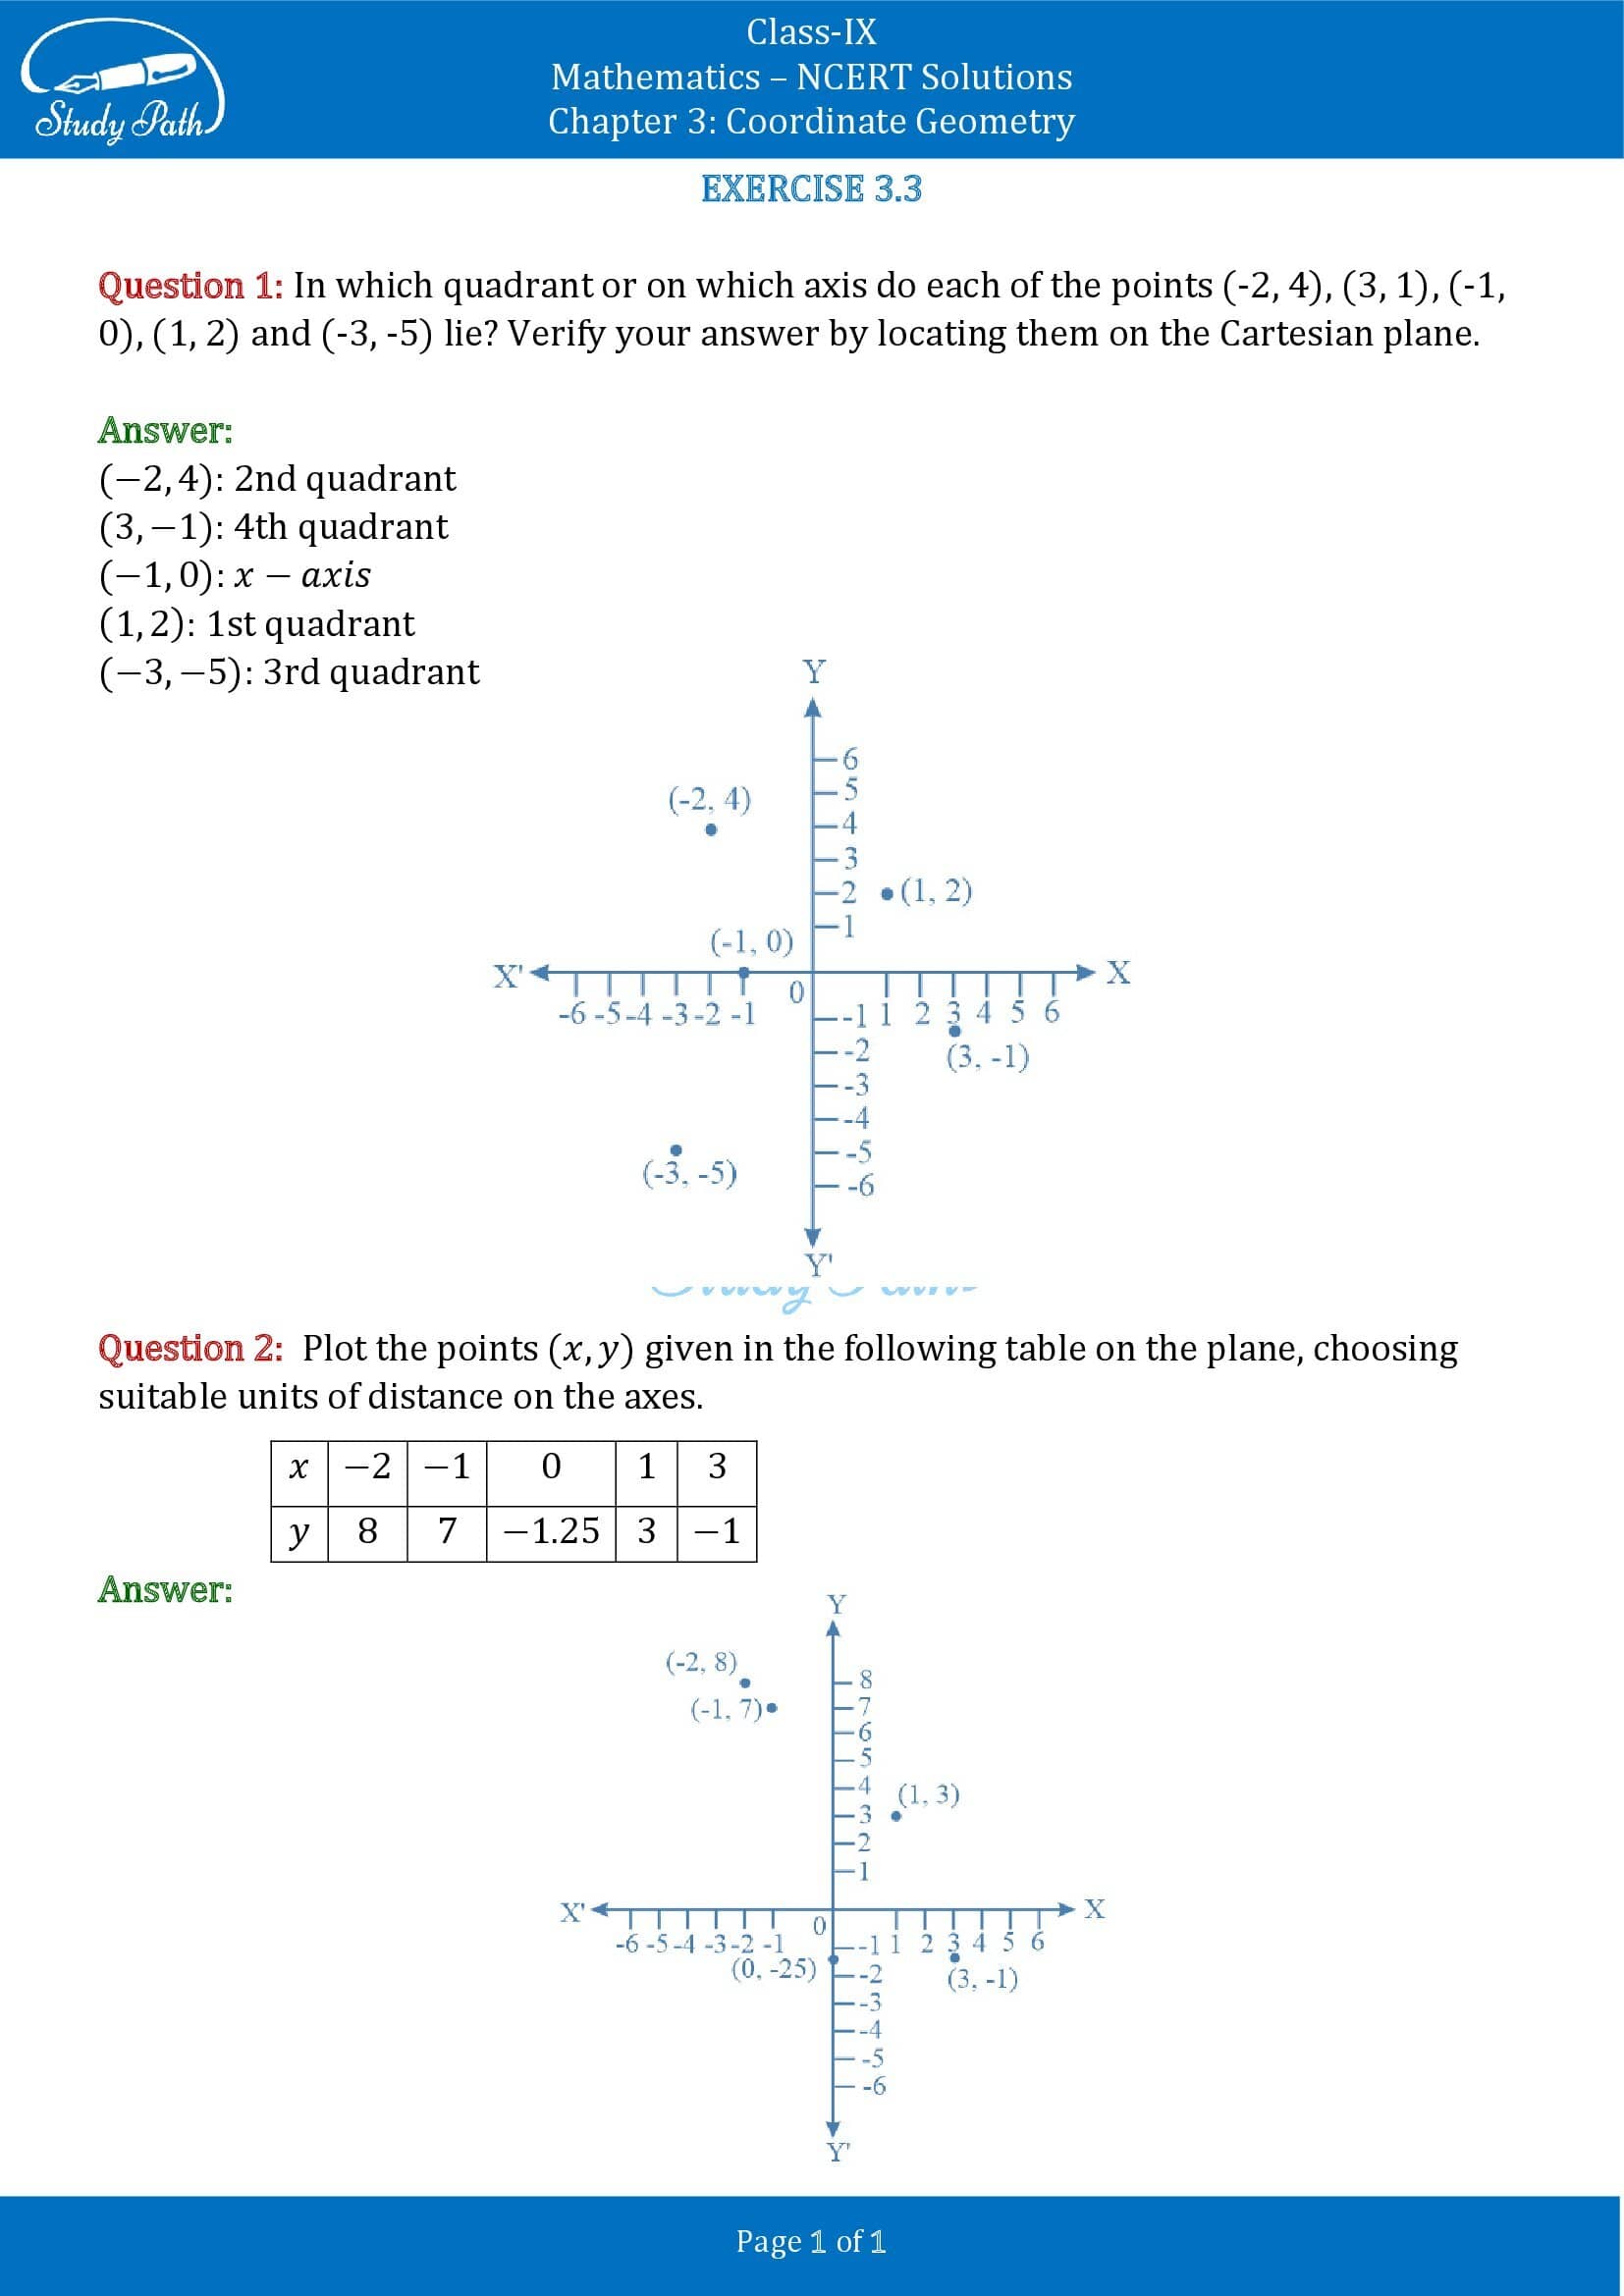 NCERT Solutions for Class 9 Maths Chapter 3 Corrdinate Geometry Exercise 3.3